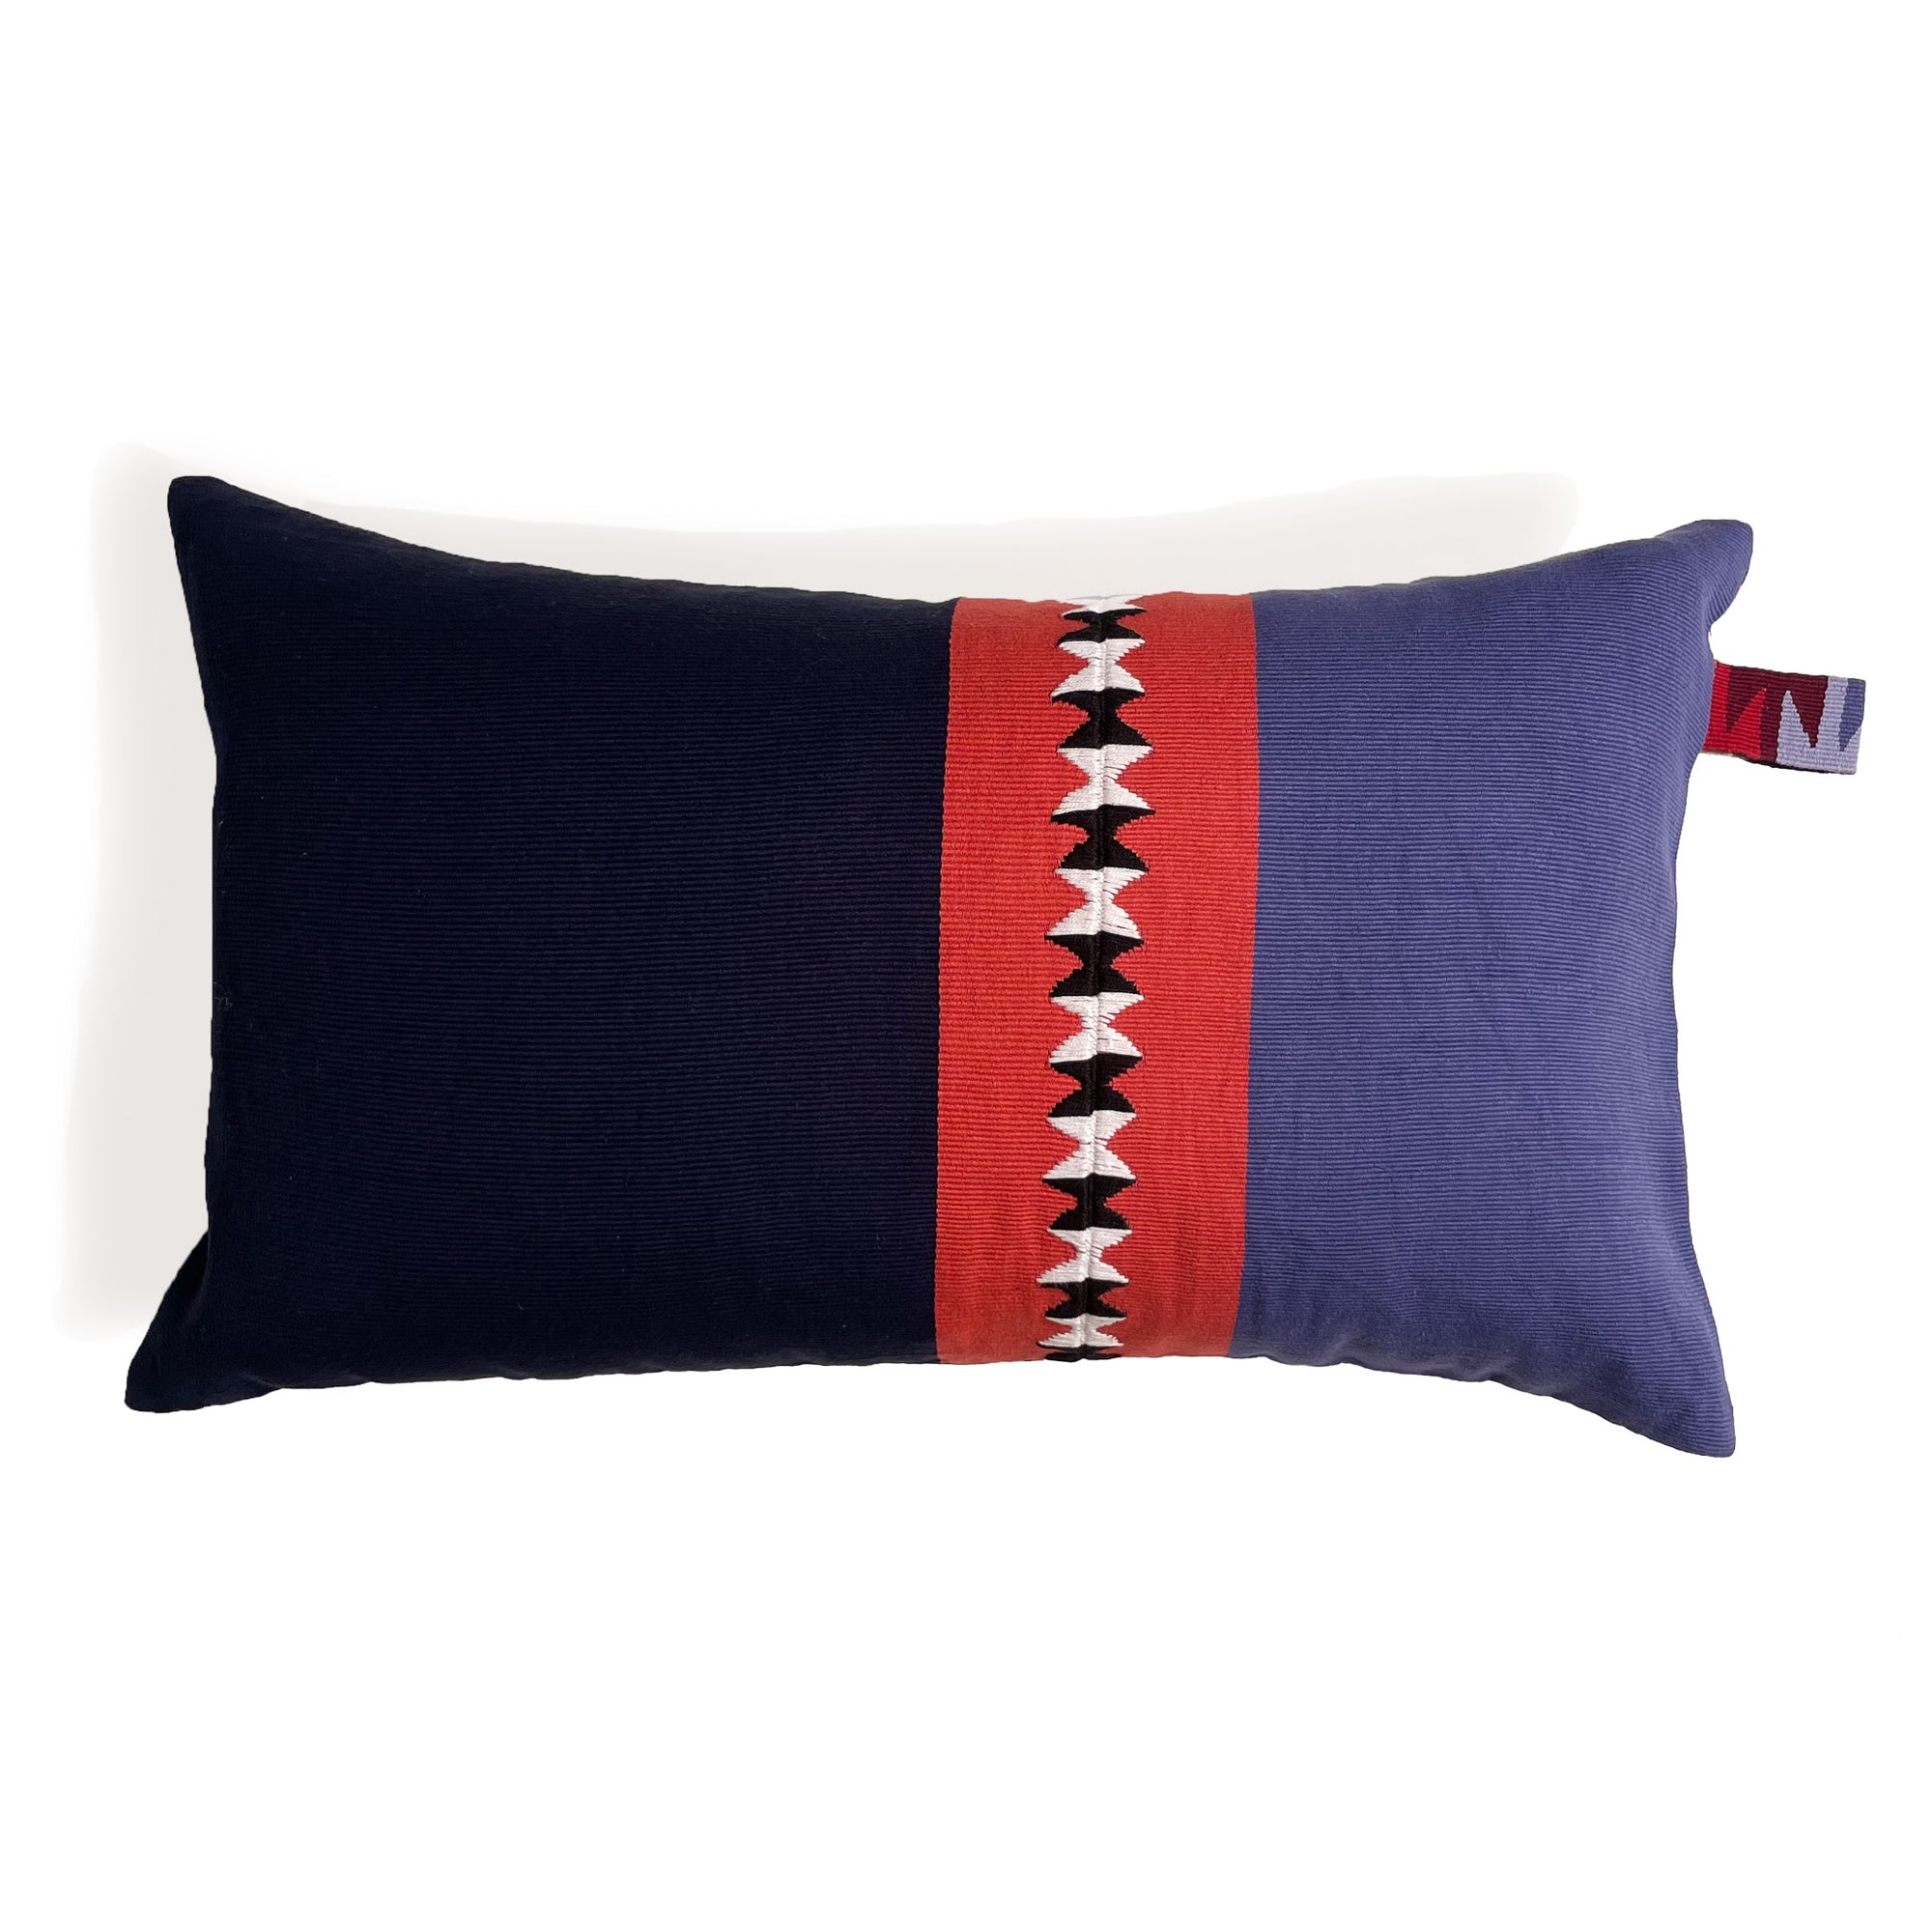 Front of rectangular cushion with color block panels in navy, red with black and white randa detail, and purple, with colorful cinta tag